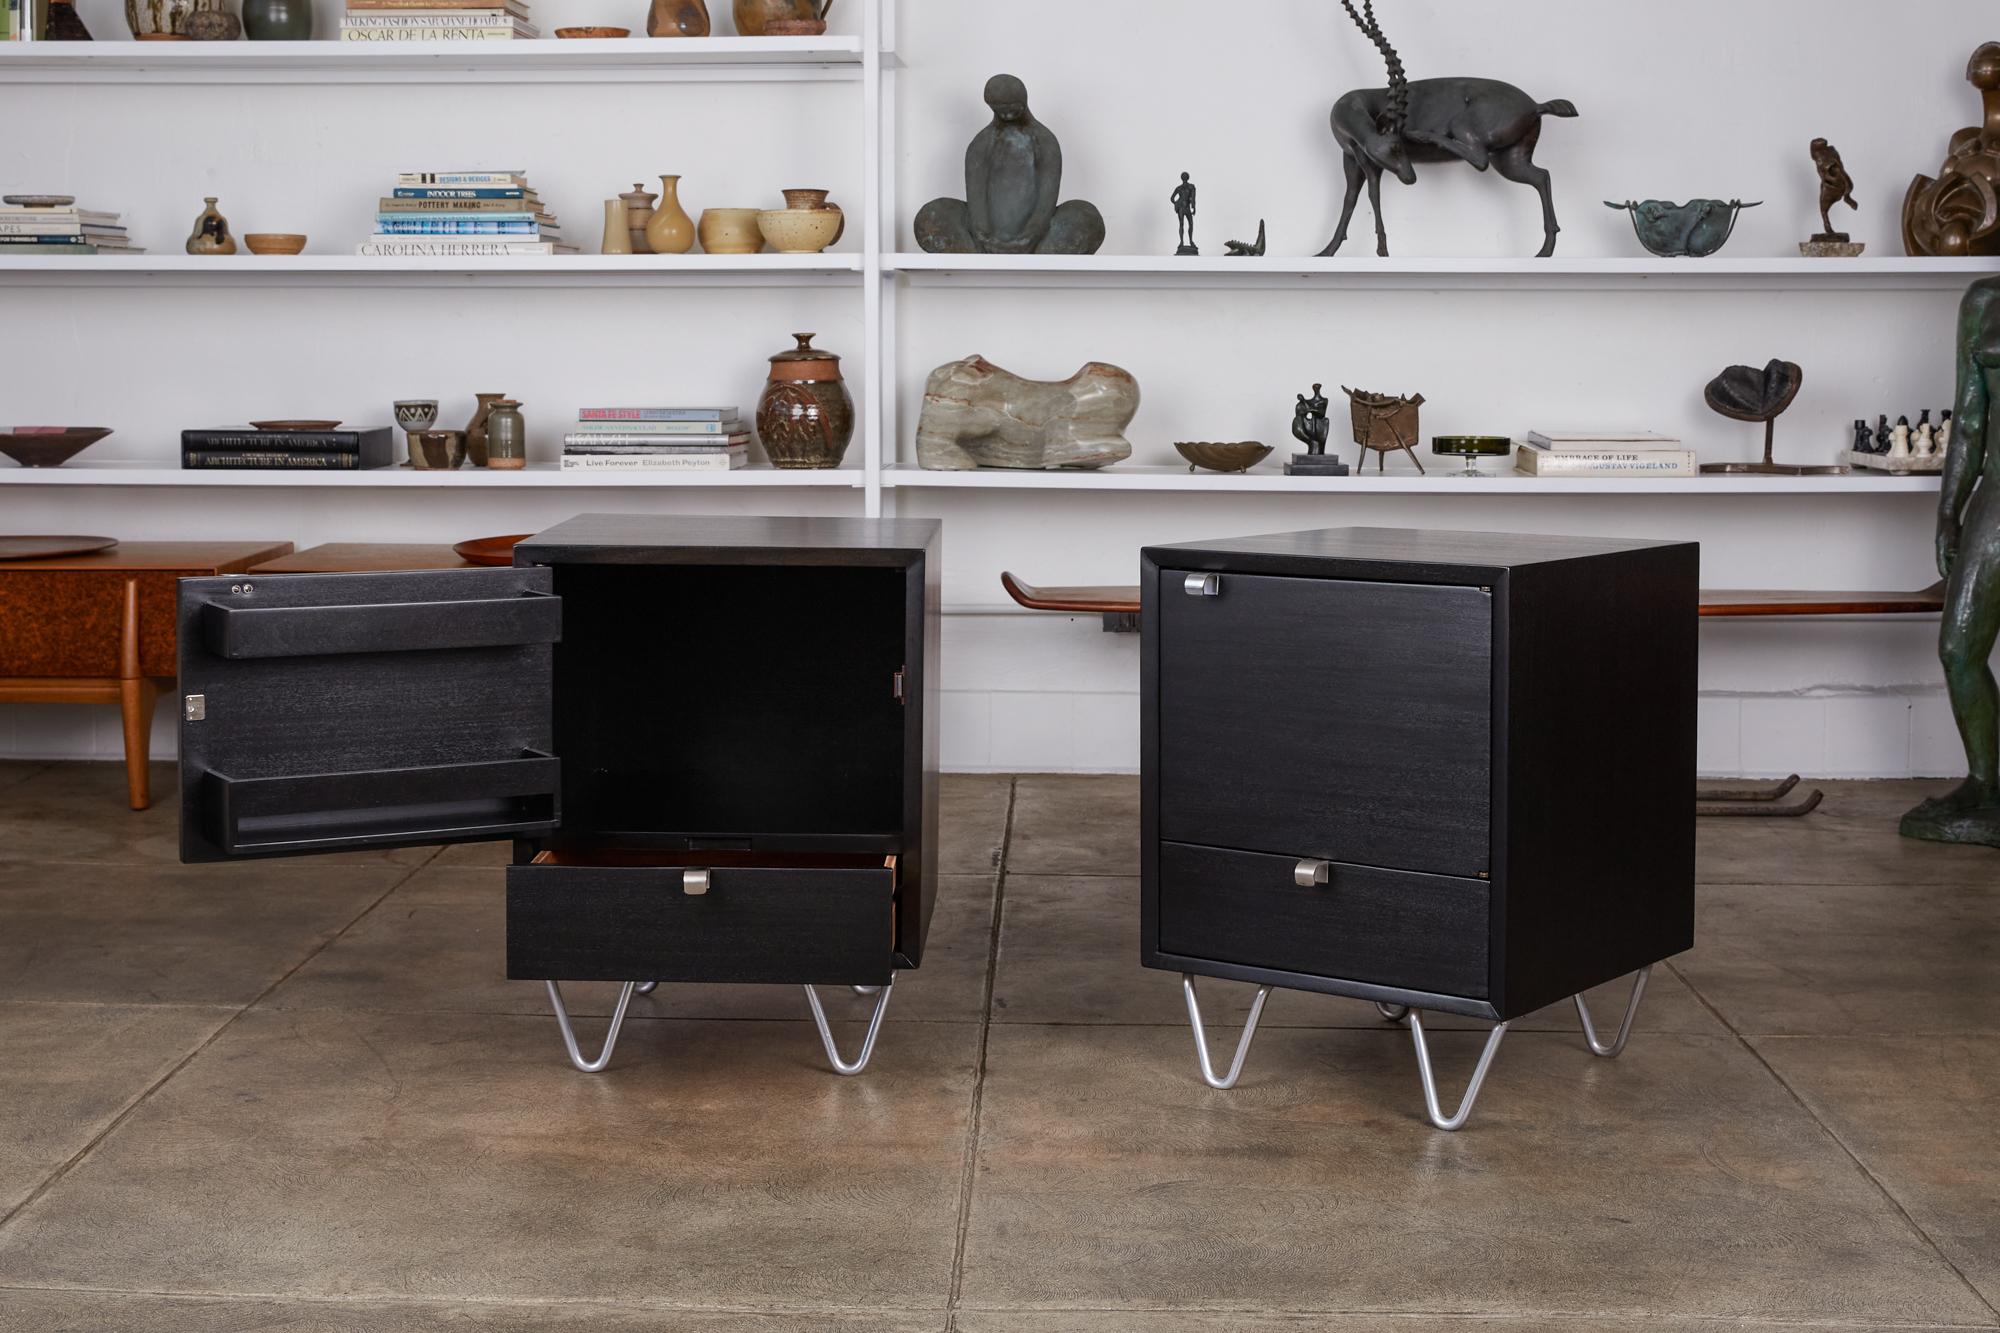 Pair of Nightstands by George Nelson for Herman Miller 1